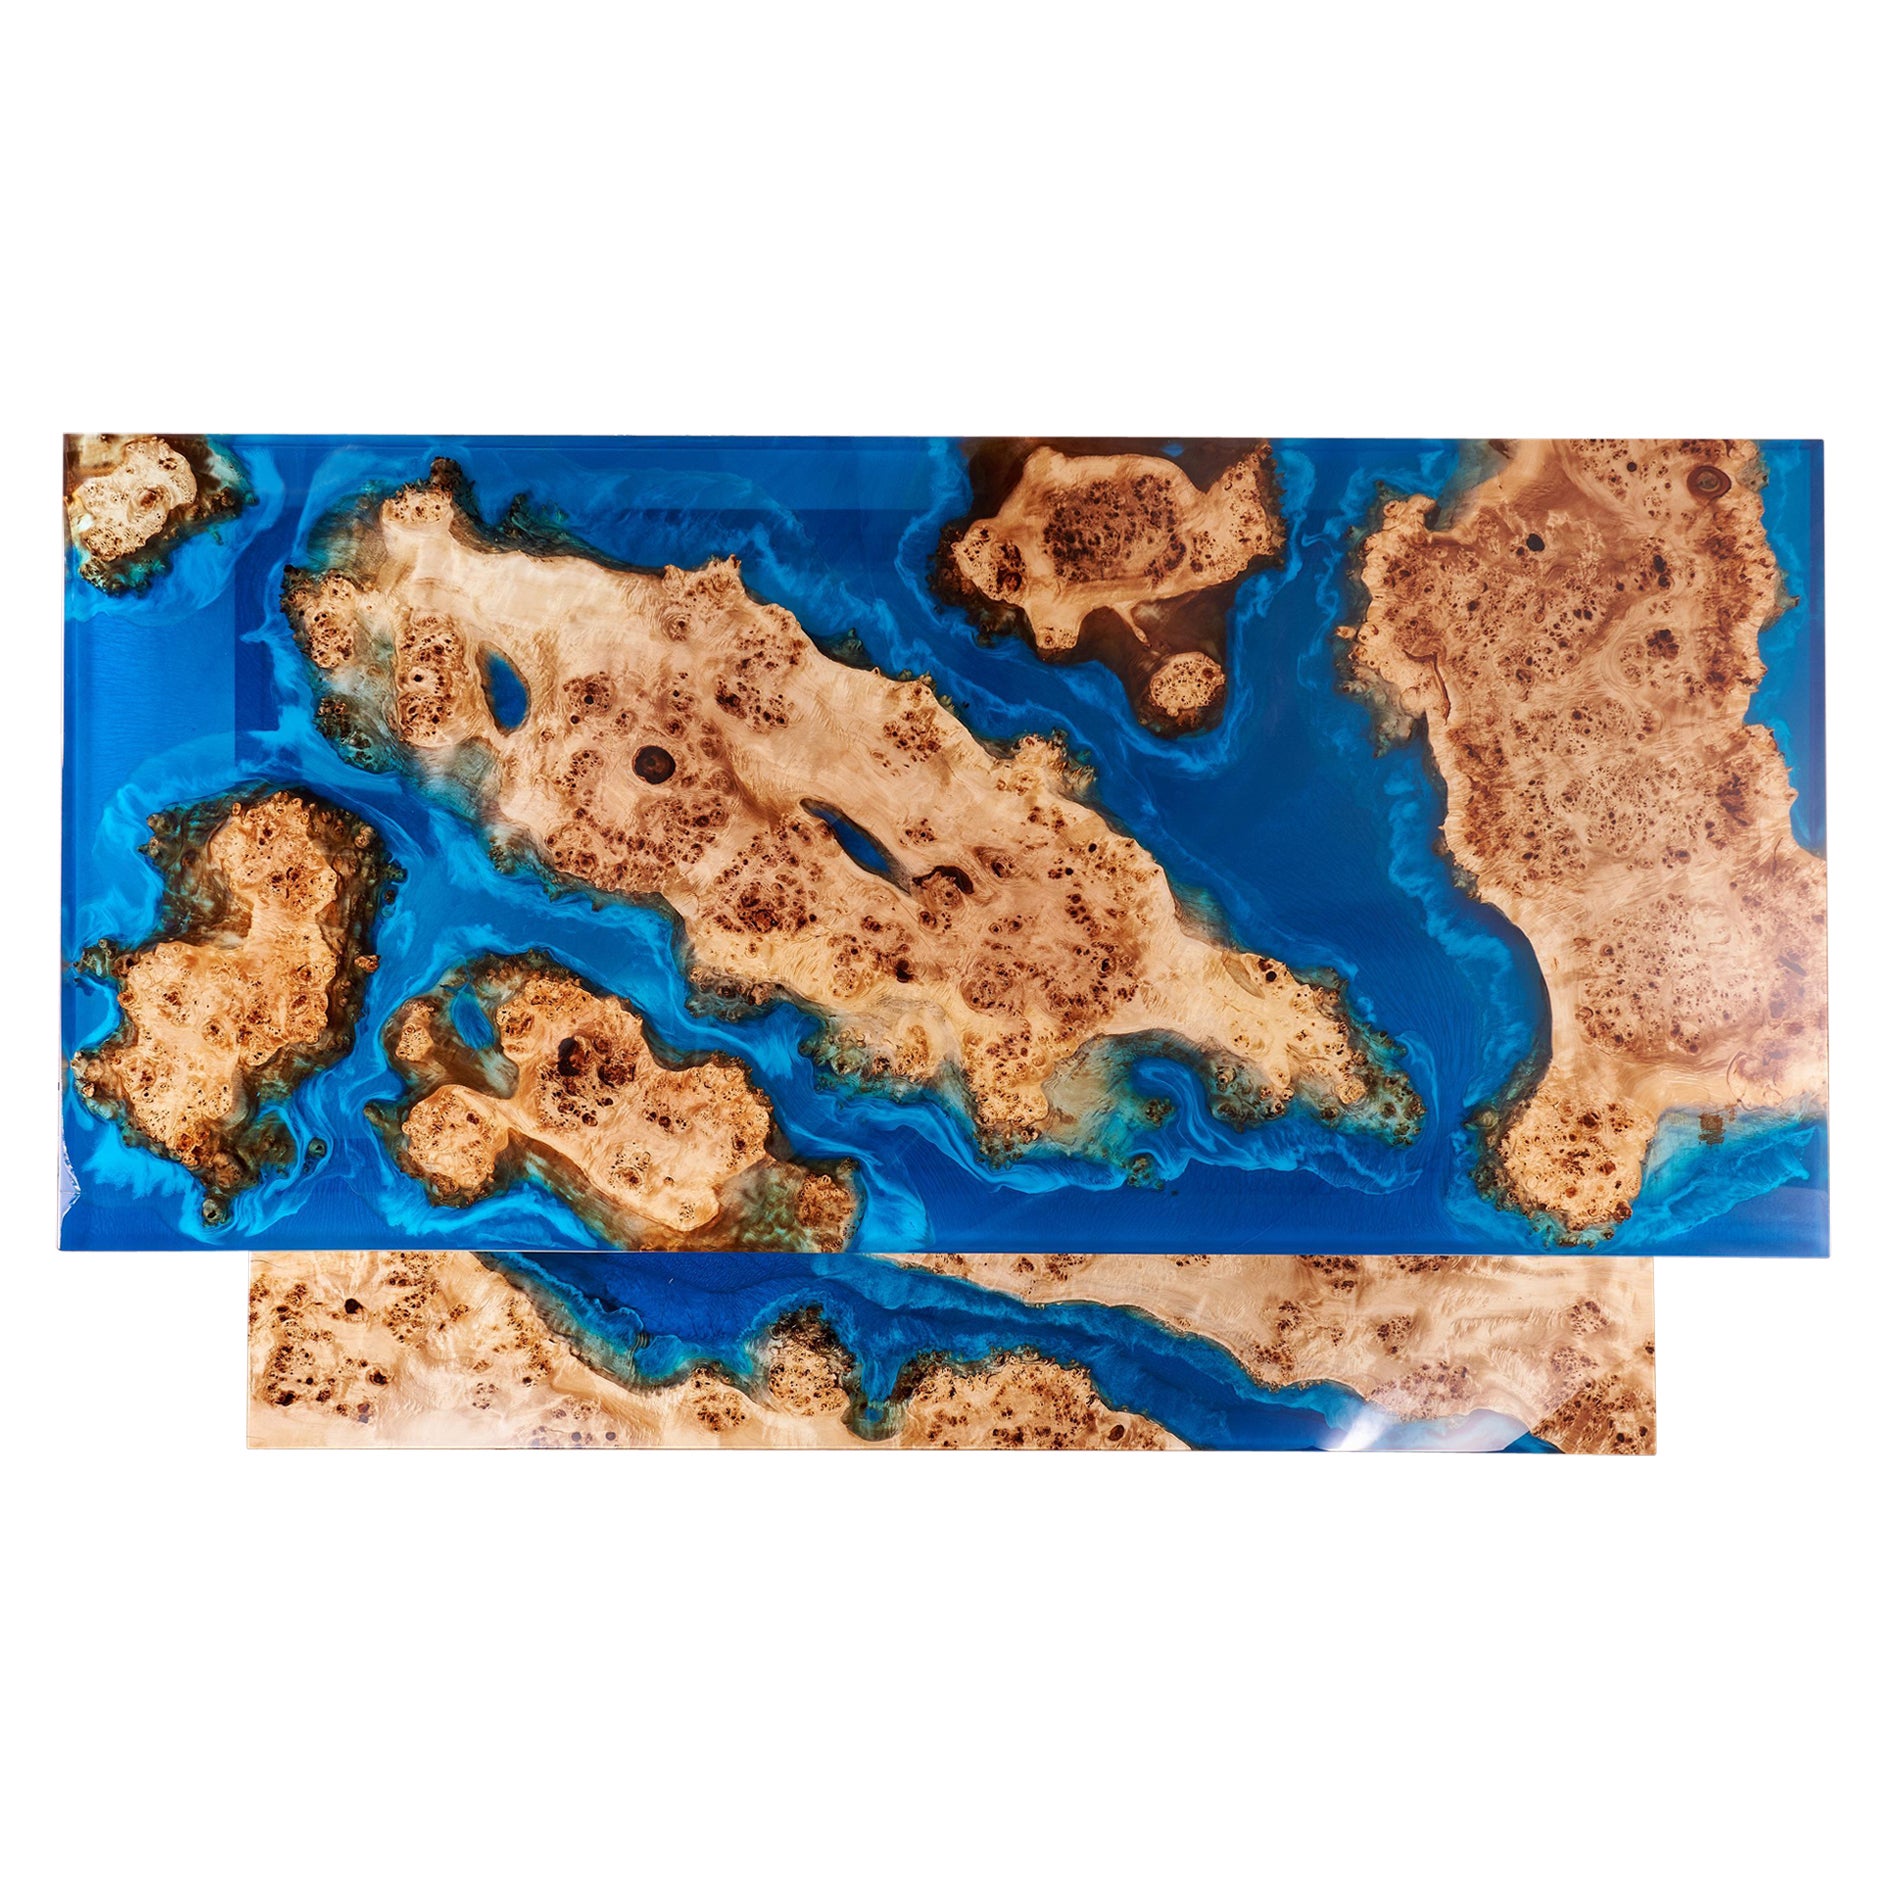 Edge
The table is made of magnificent ancient slabs of burl wood. Their texture has been shaped over hundreds of years to look as it does now. When the wood dried, we decided to immortalize it in this form. How many generations has it been watching?